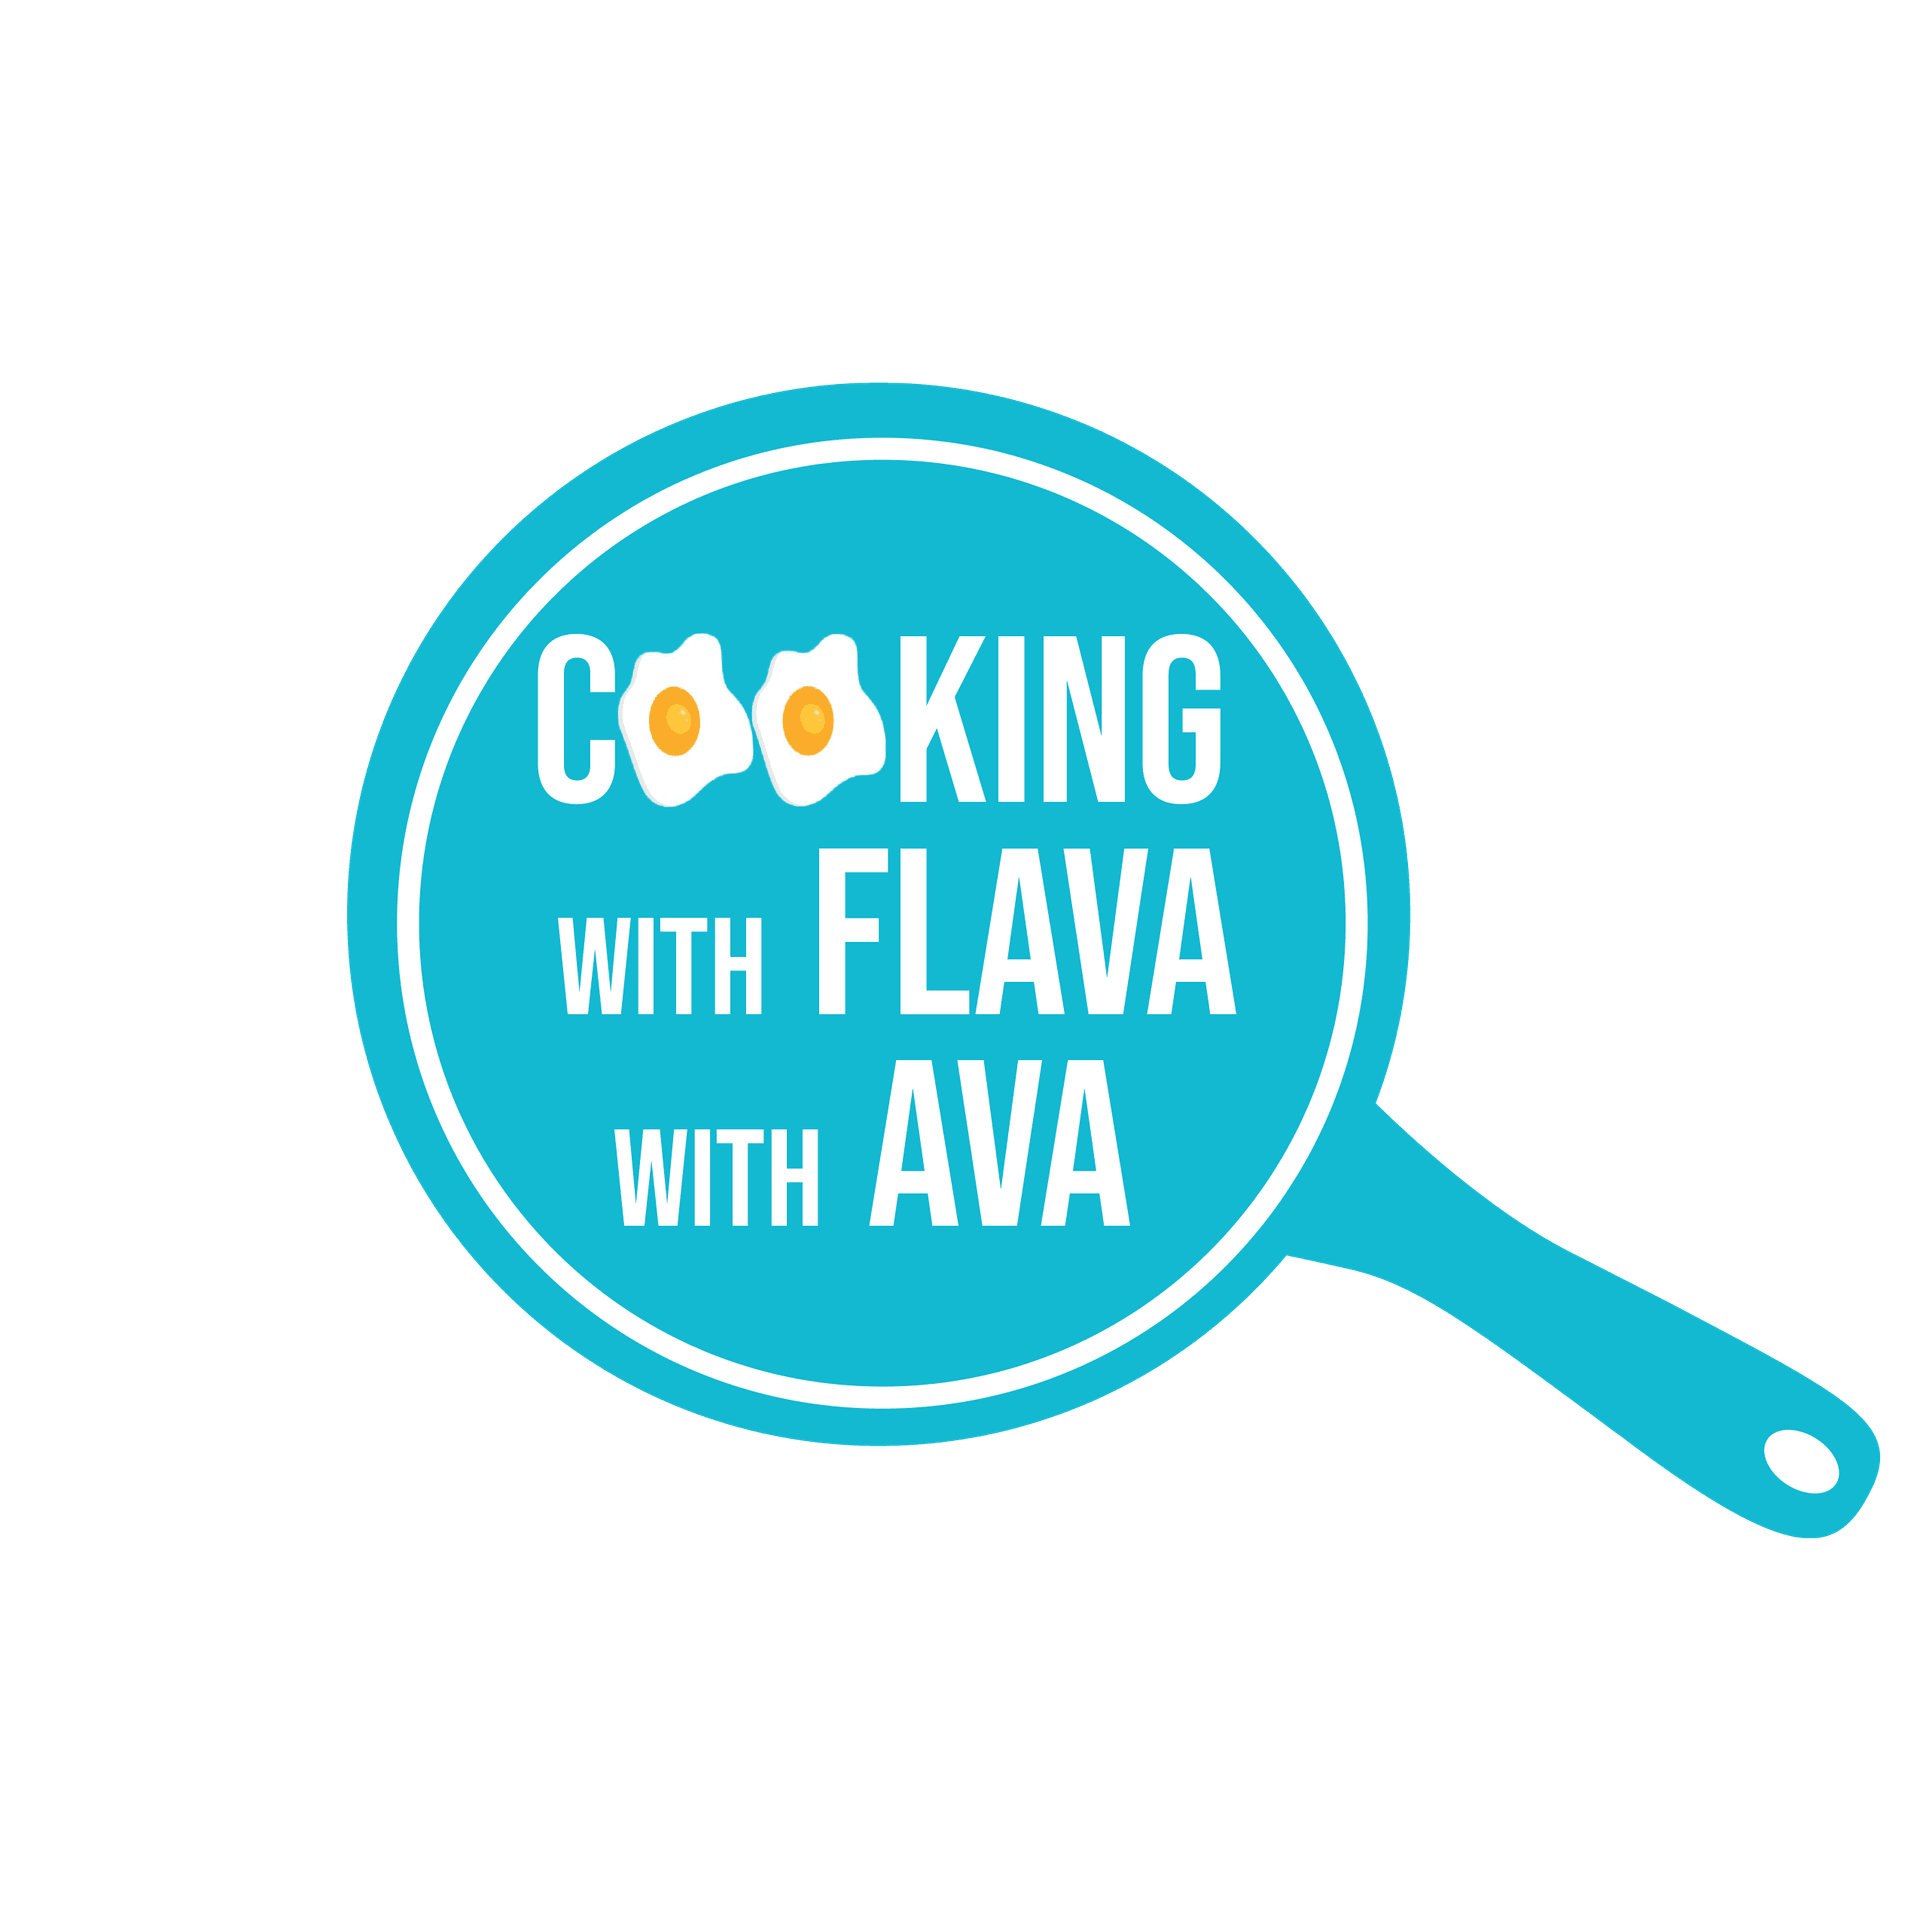 Catering Cooking with Flava with Ava